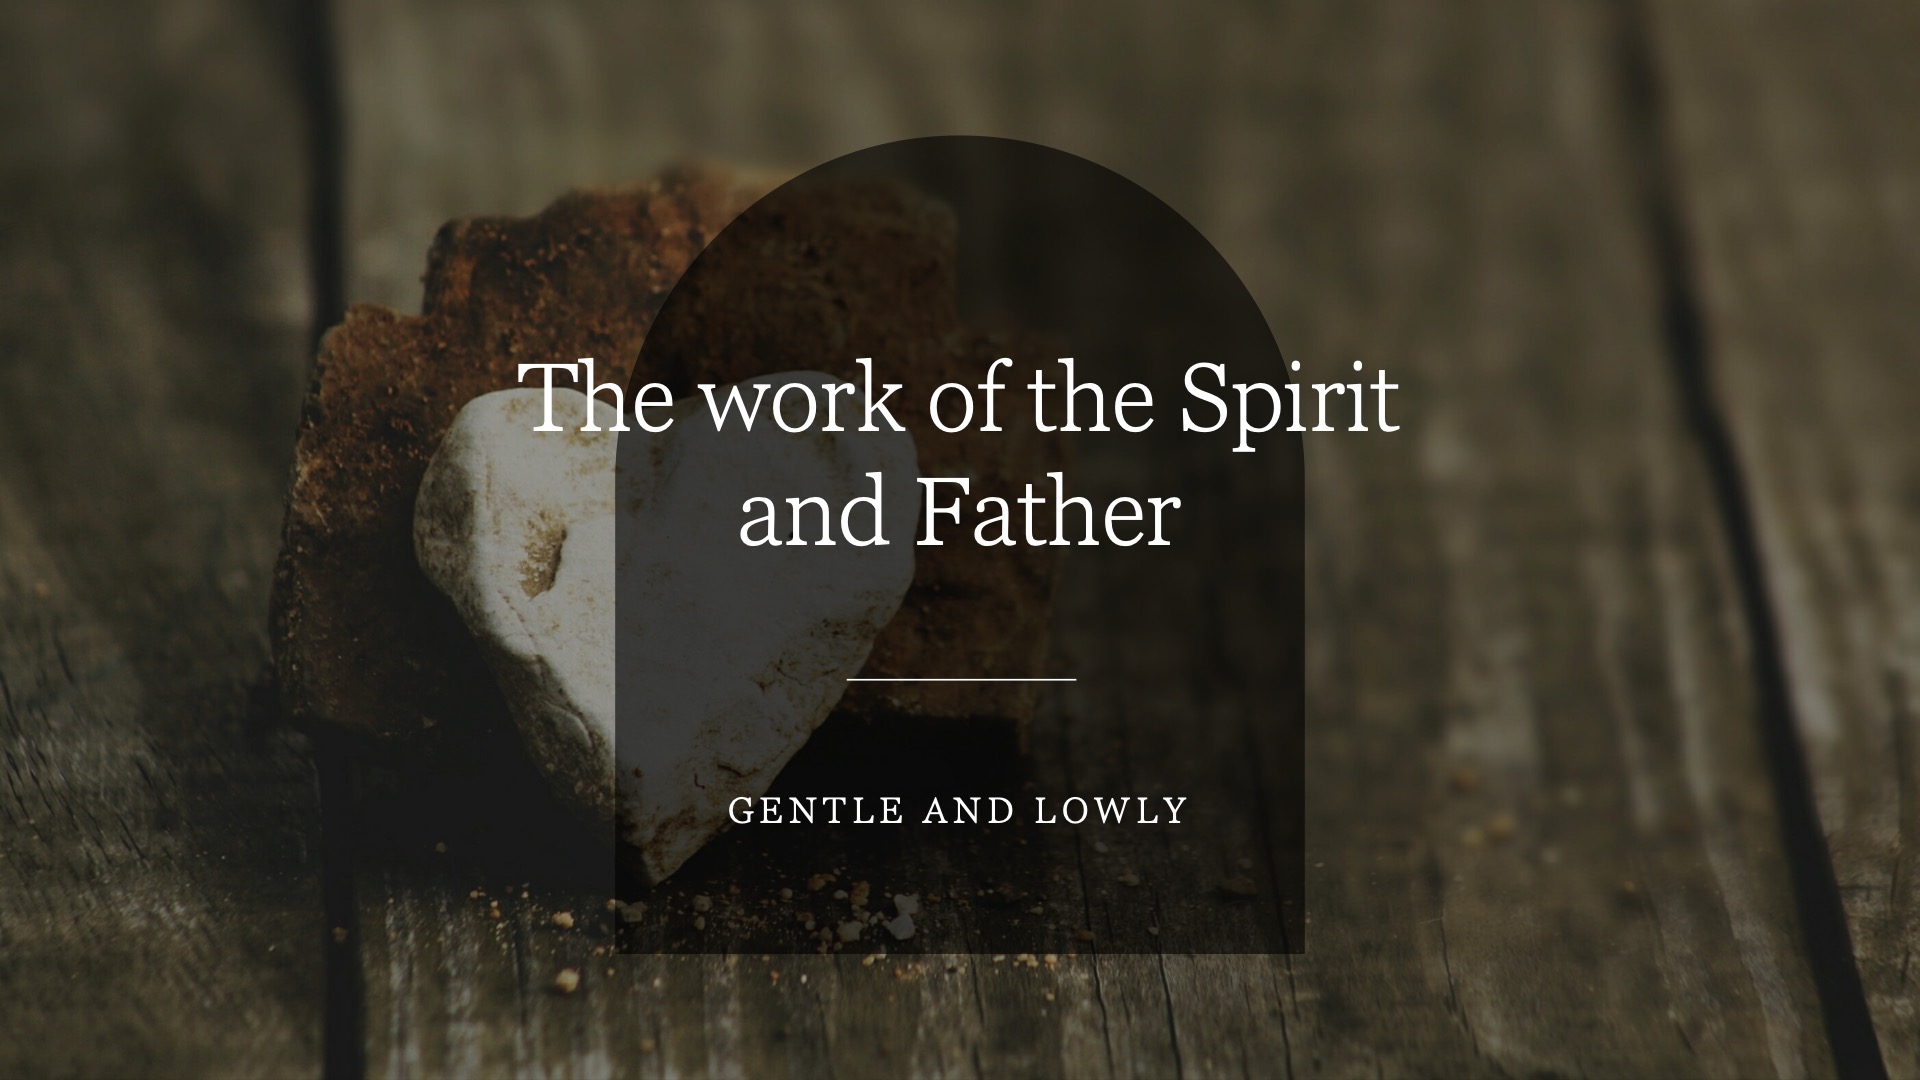 The work of the Spirit and the Father